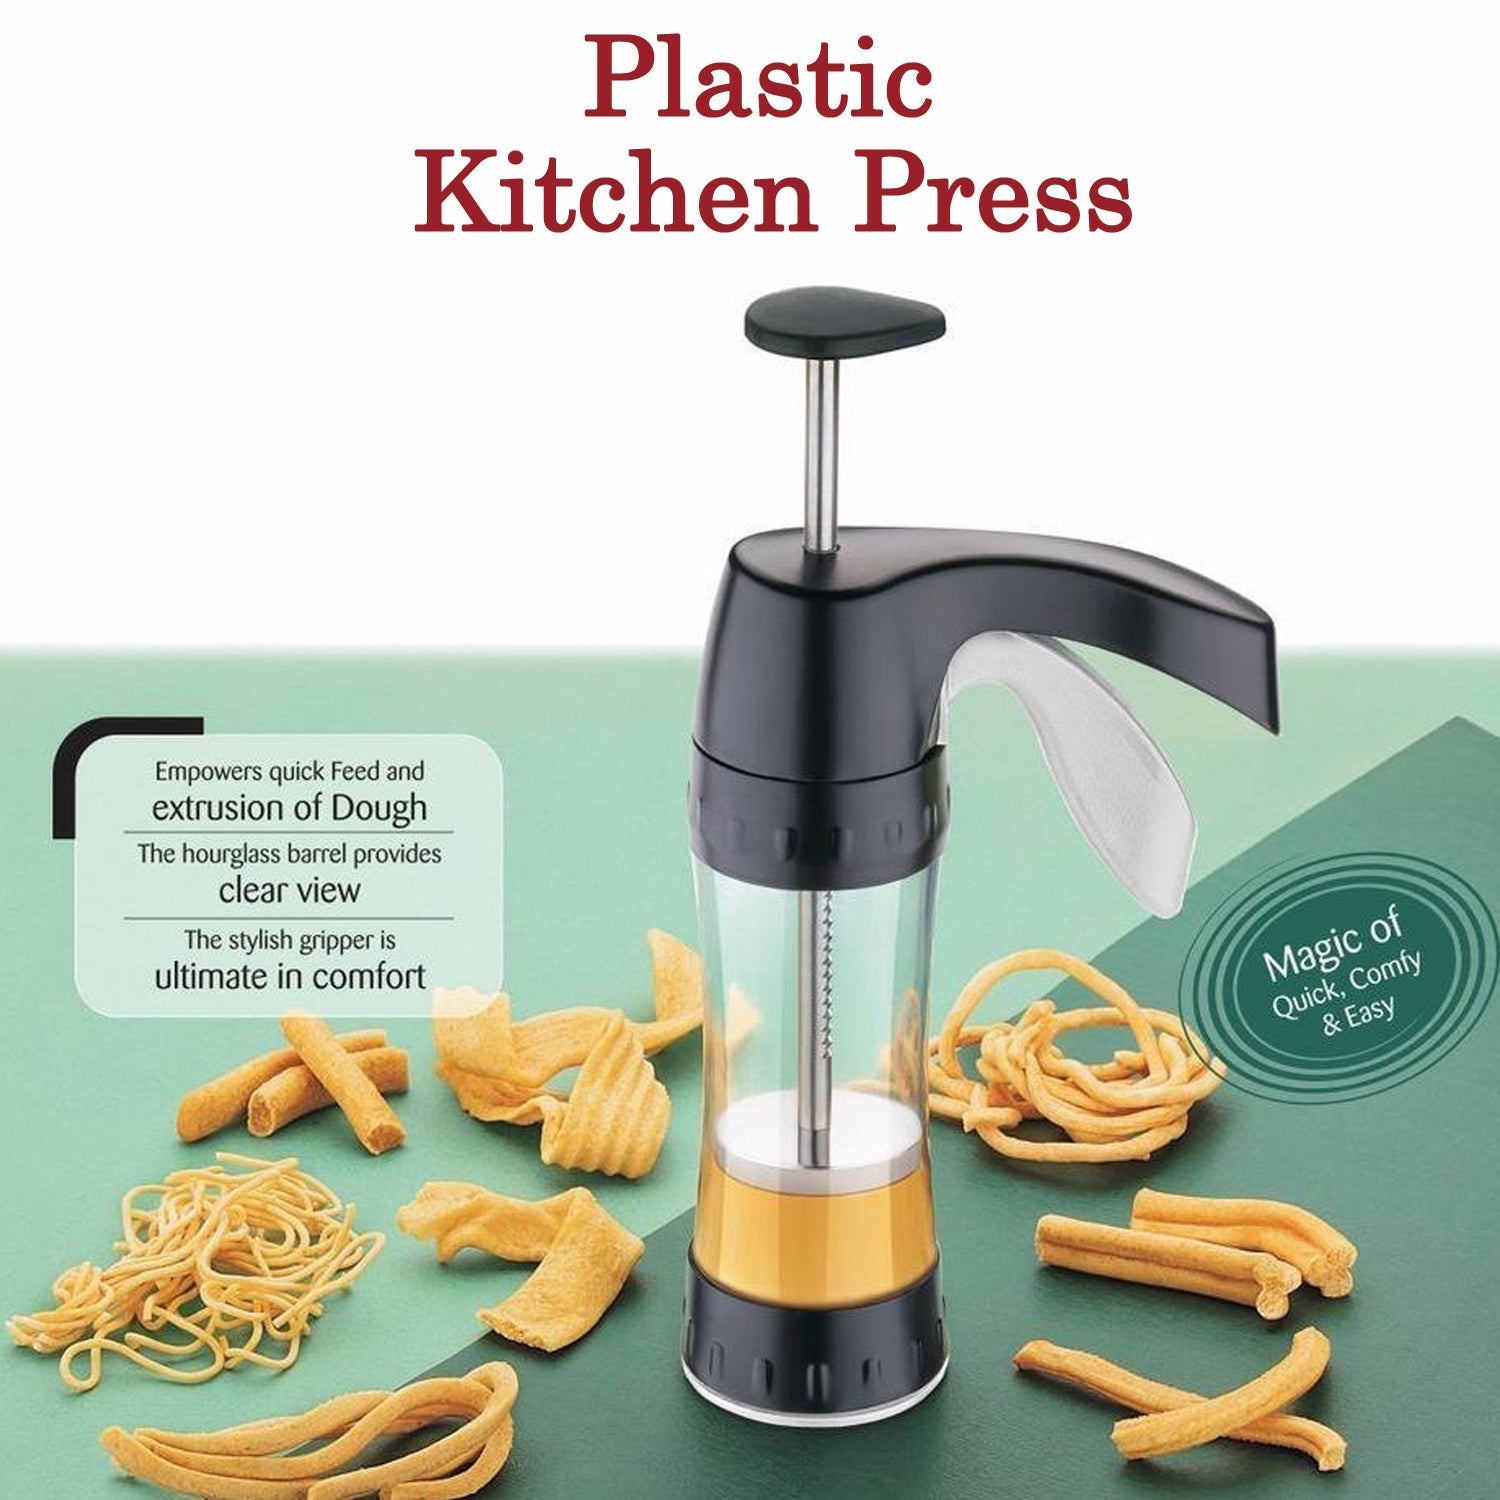 2718 Plastic Kitchen Press Aluminum Base used in all kinds of places, mostly household kitchens while making dishes and tortillas etc.